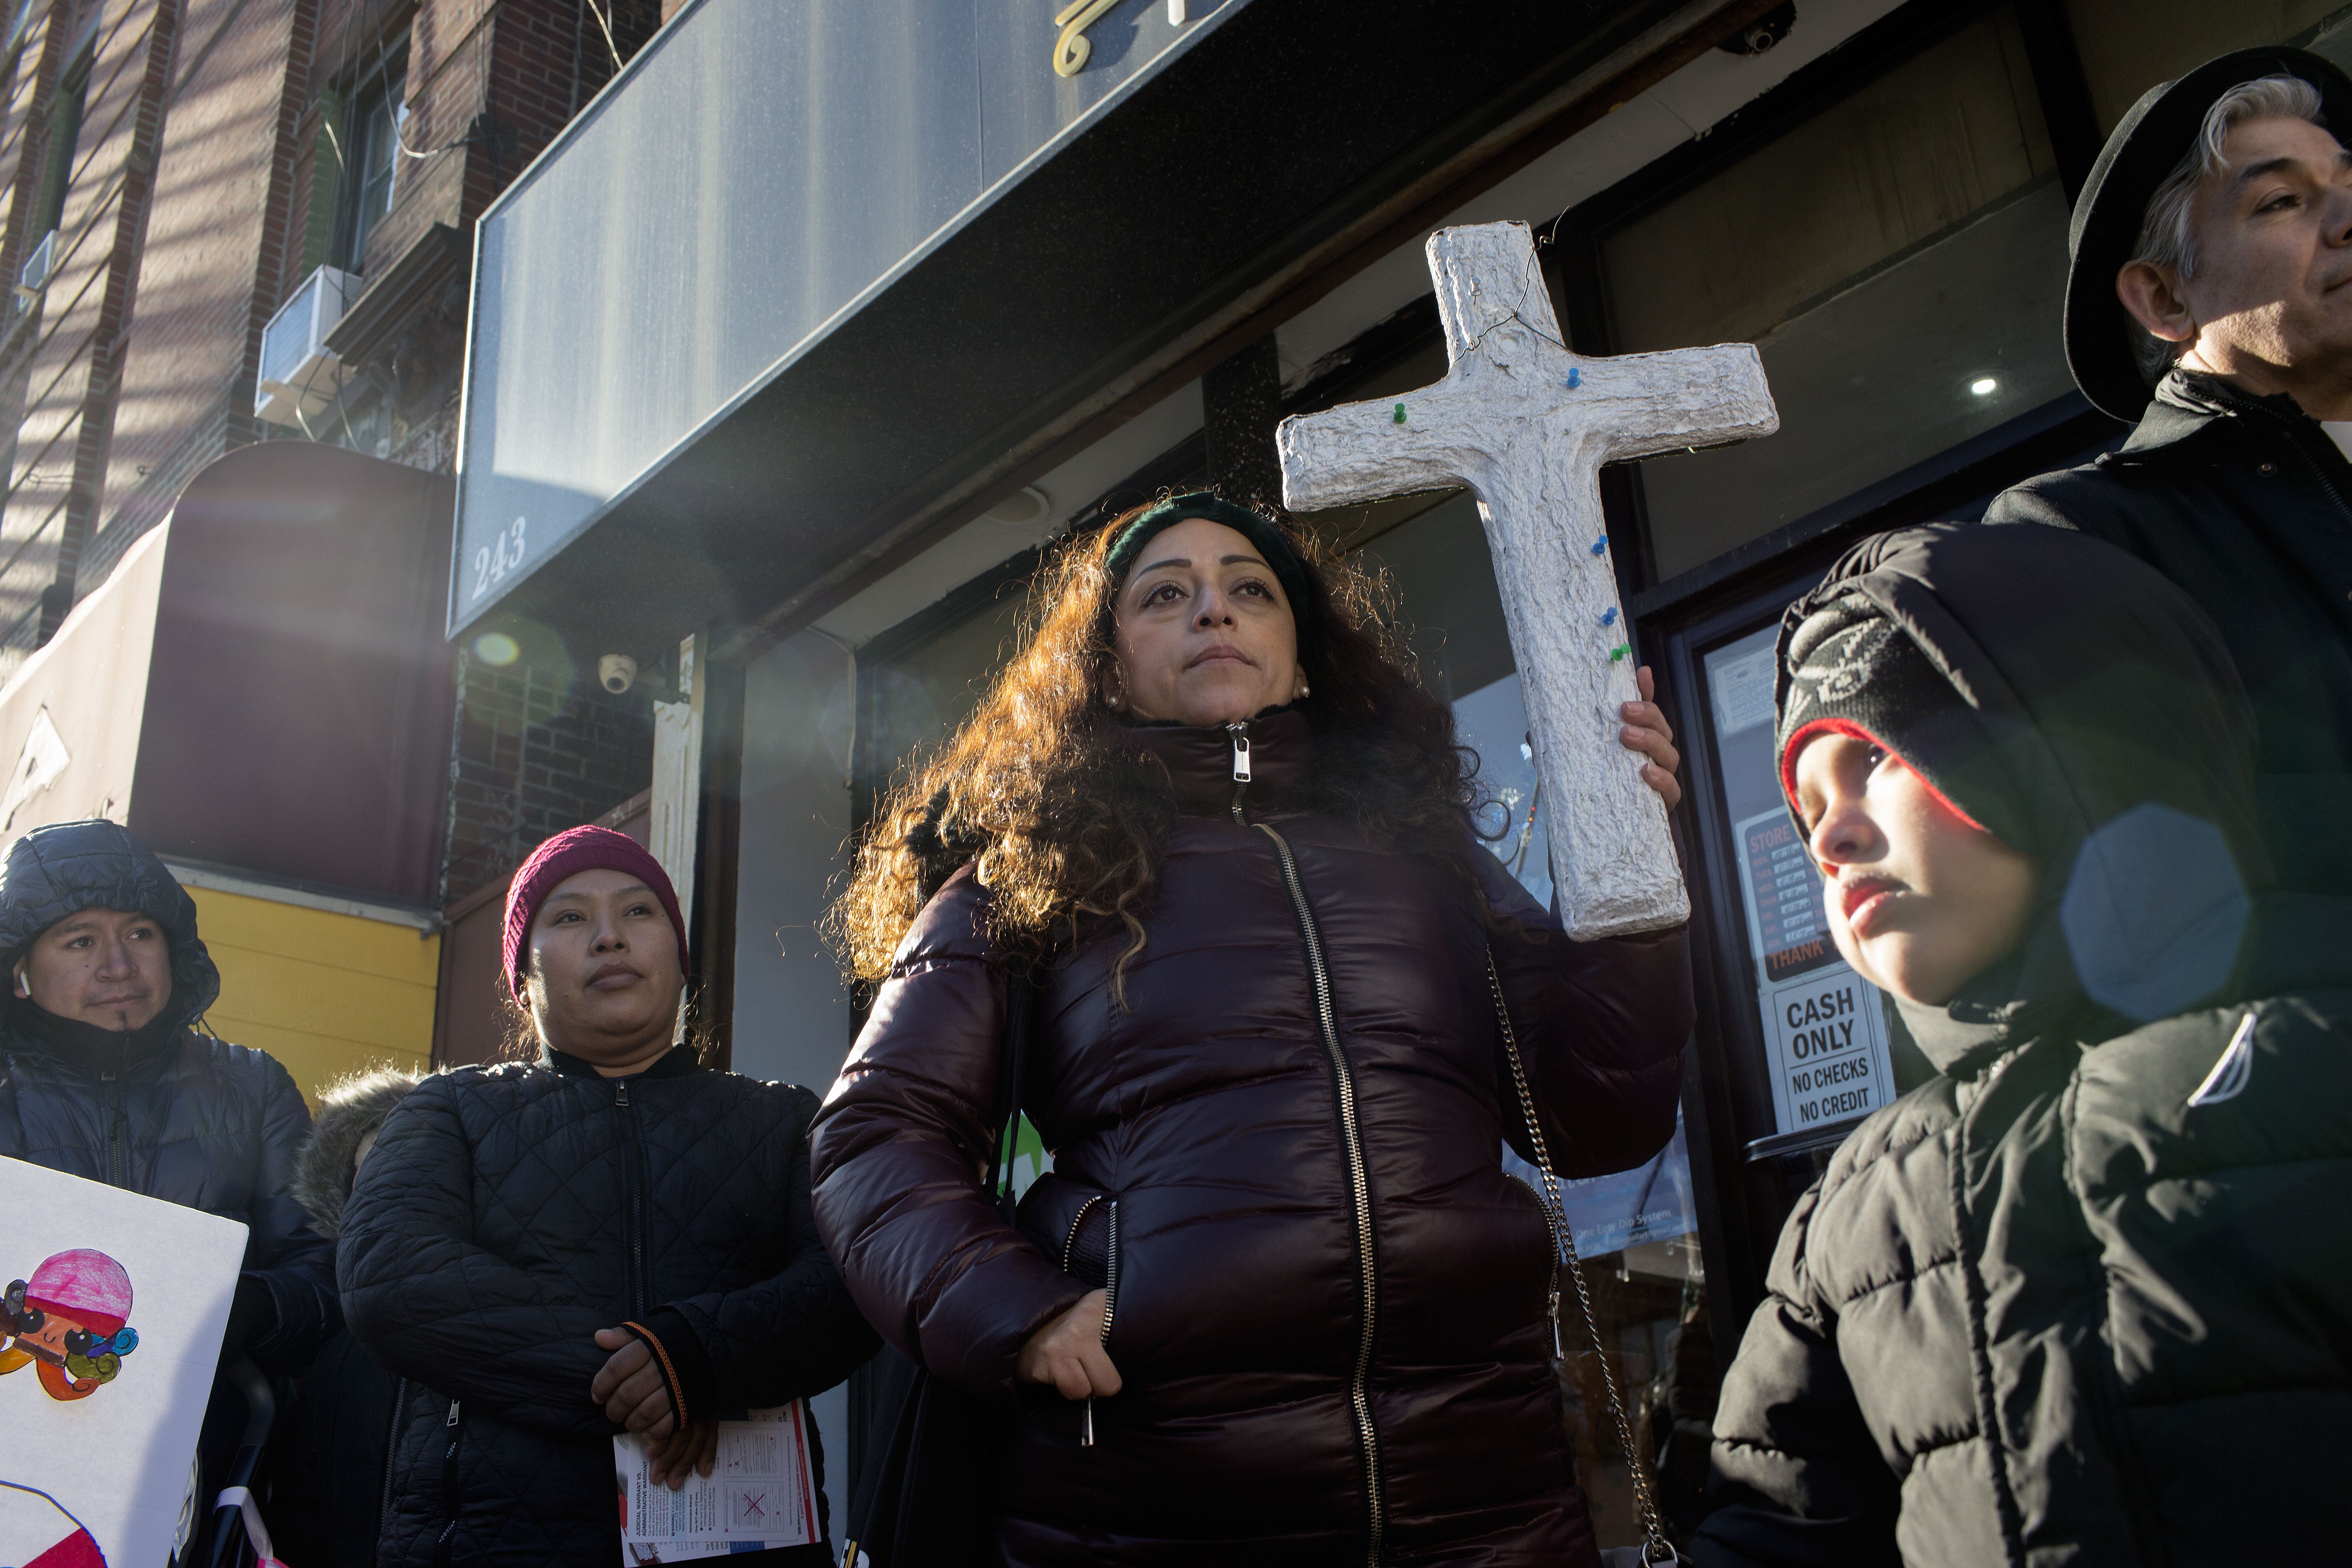 Family and friends of Javier Rodriguez hold a demonstration on MLK Day to protest Javier's recent arrest by ICE agents, on January 20, 2020 outside of his apartment in the South Bronx, New York.